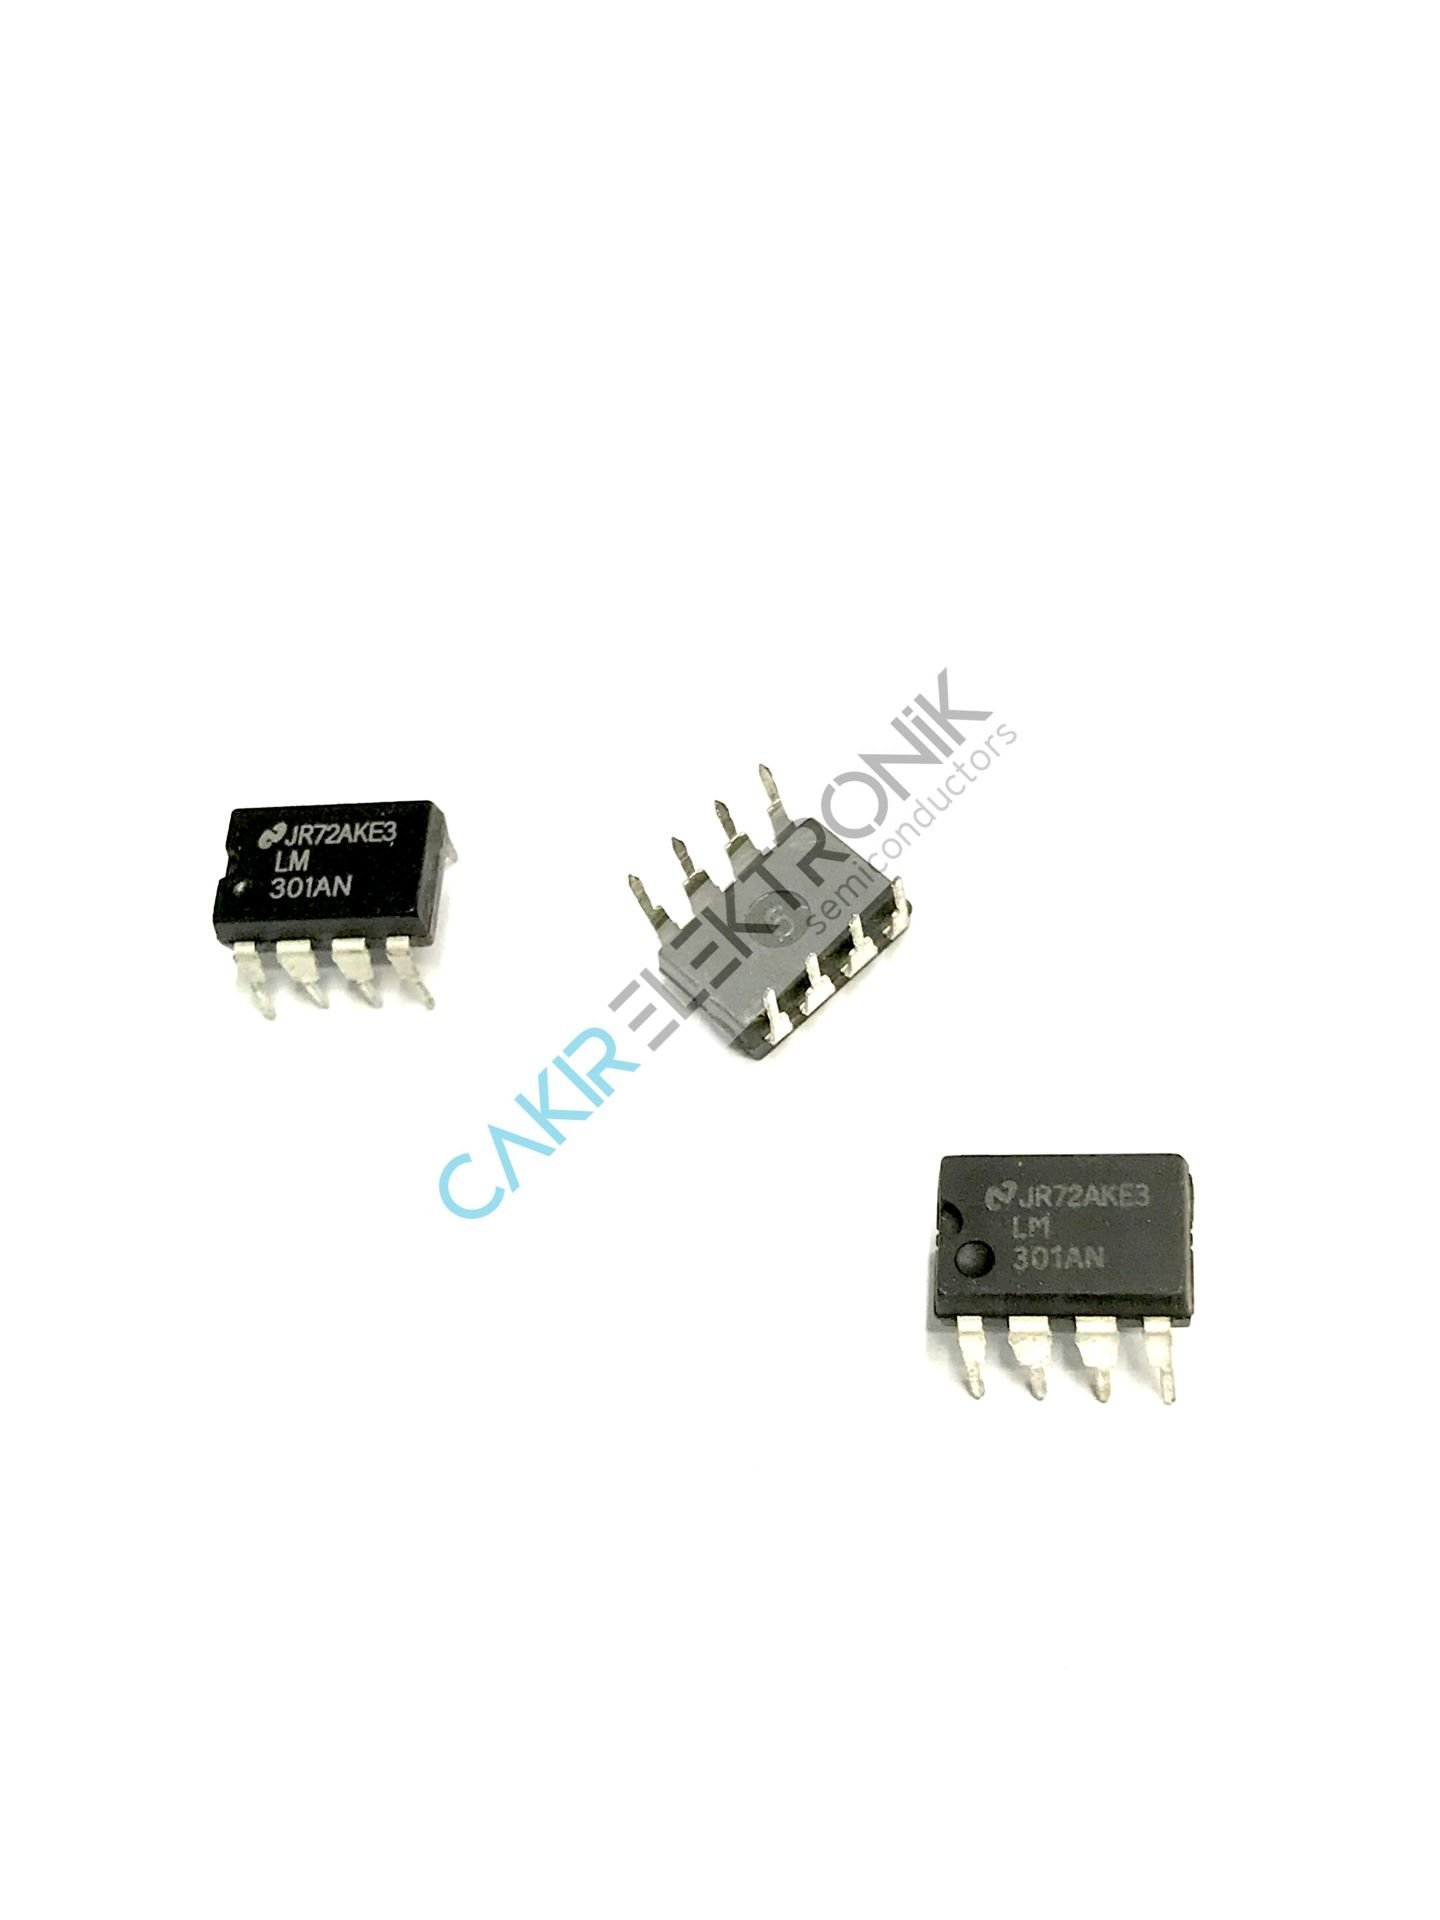 LM301AN - LM301 - Operational Amplifiers